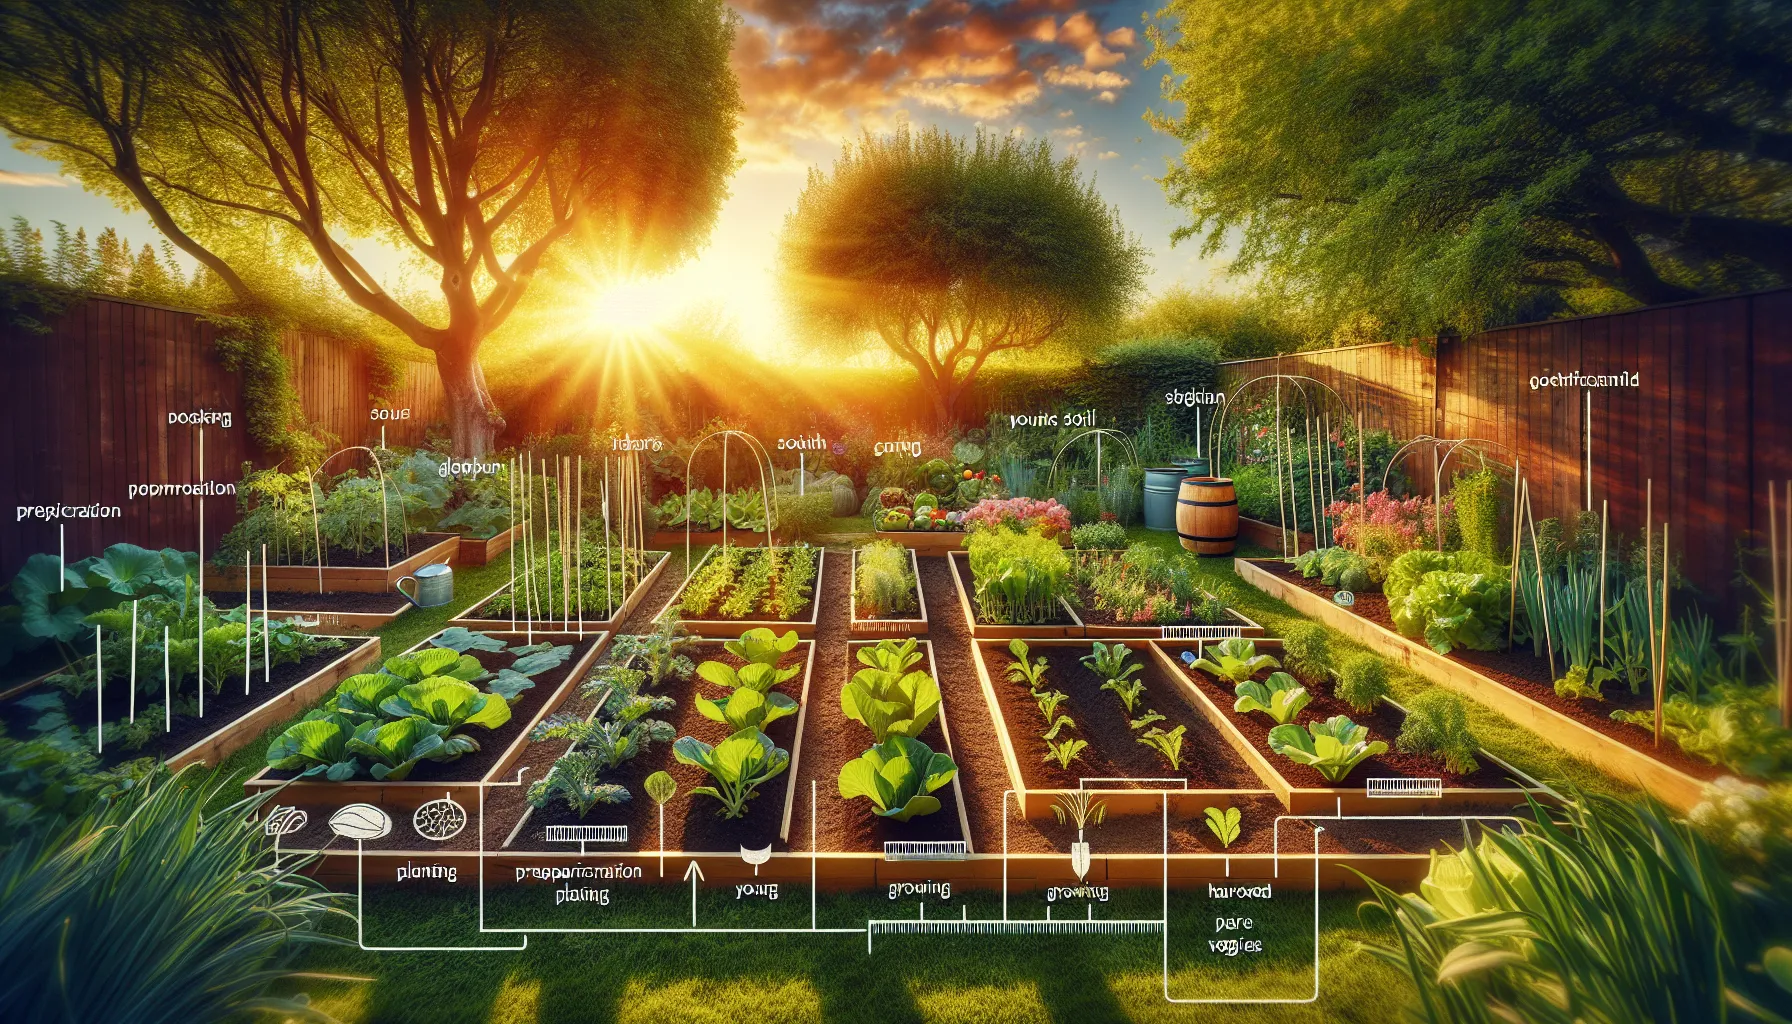 A well-organized vegetable garden with raised beds and labeled plants basks in the warm glow of a setting sun.